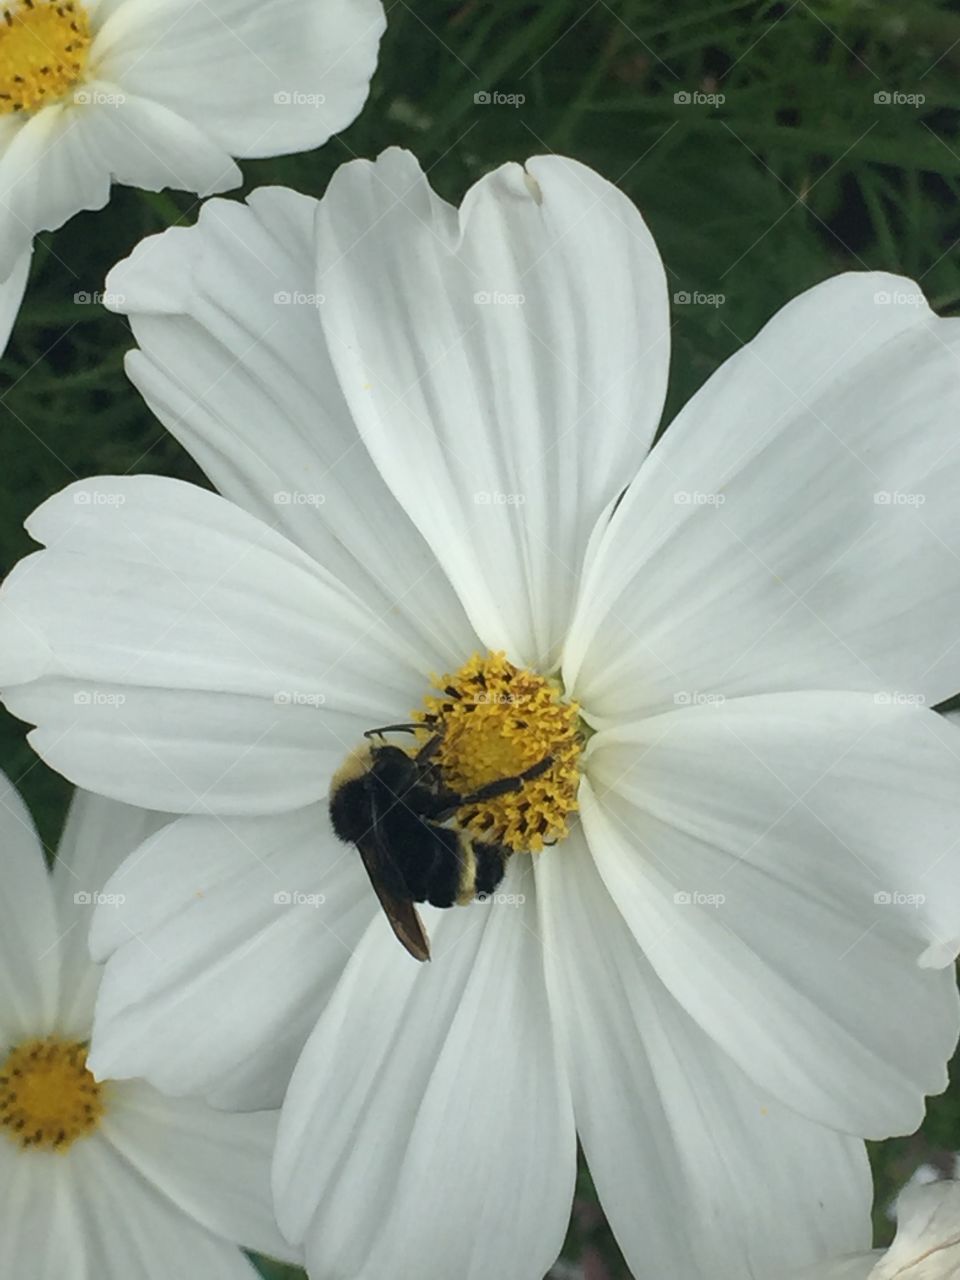 Thirsty Bumble bee drinking pollen from a blooming daisy